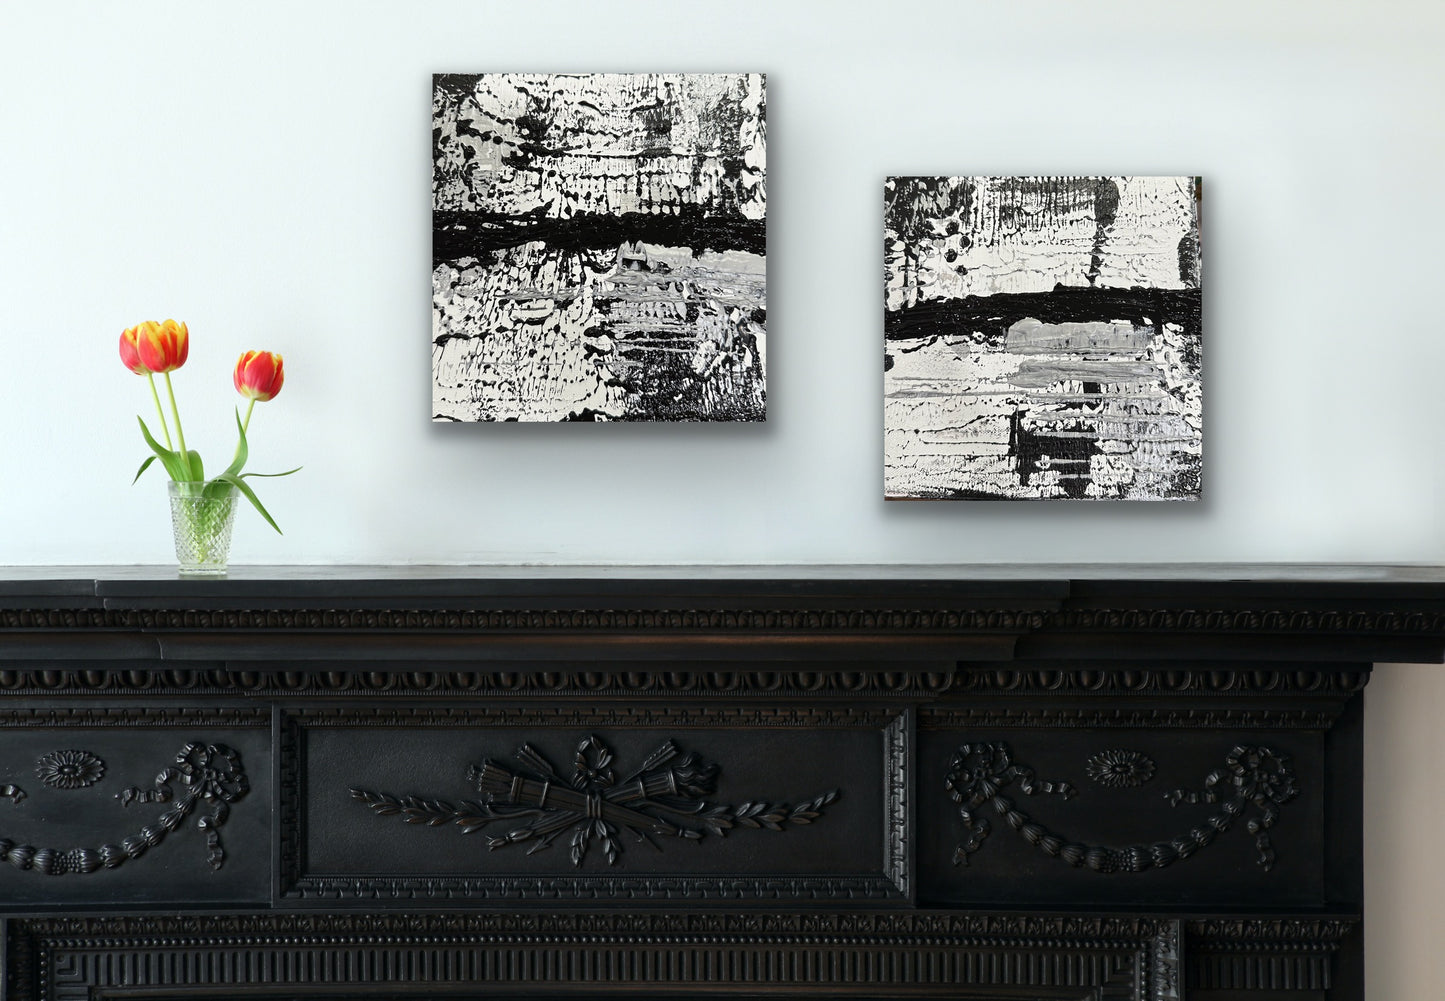 2X Study in Black & White (Two Paintings)